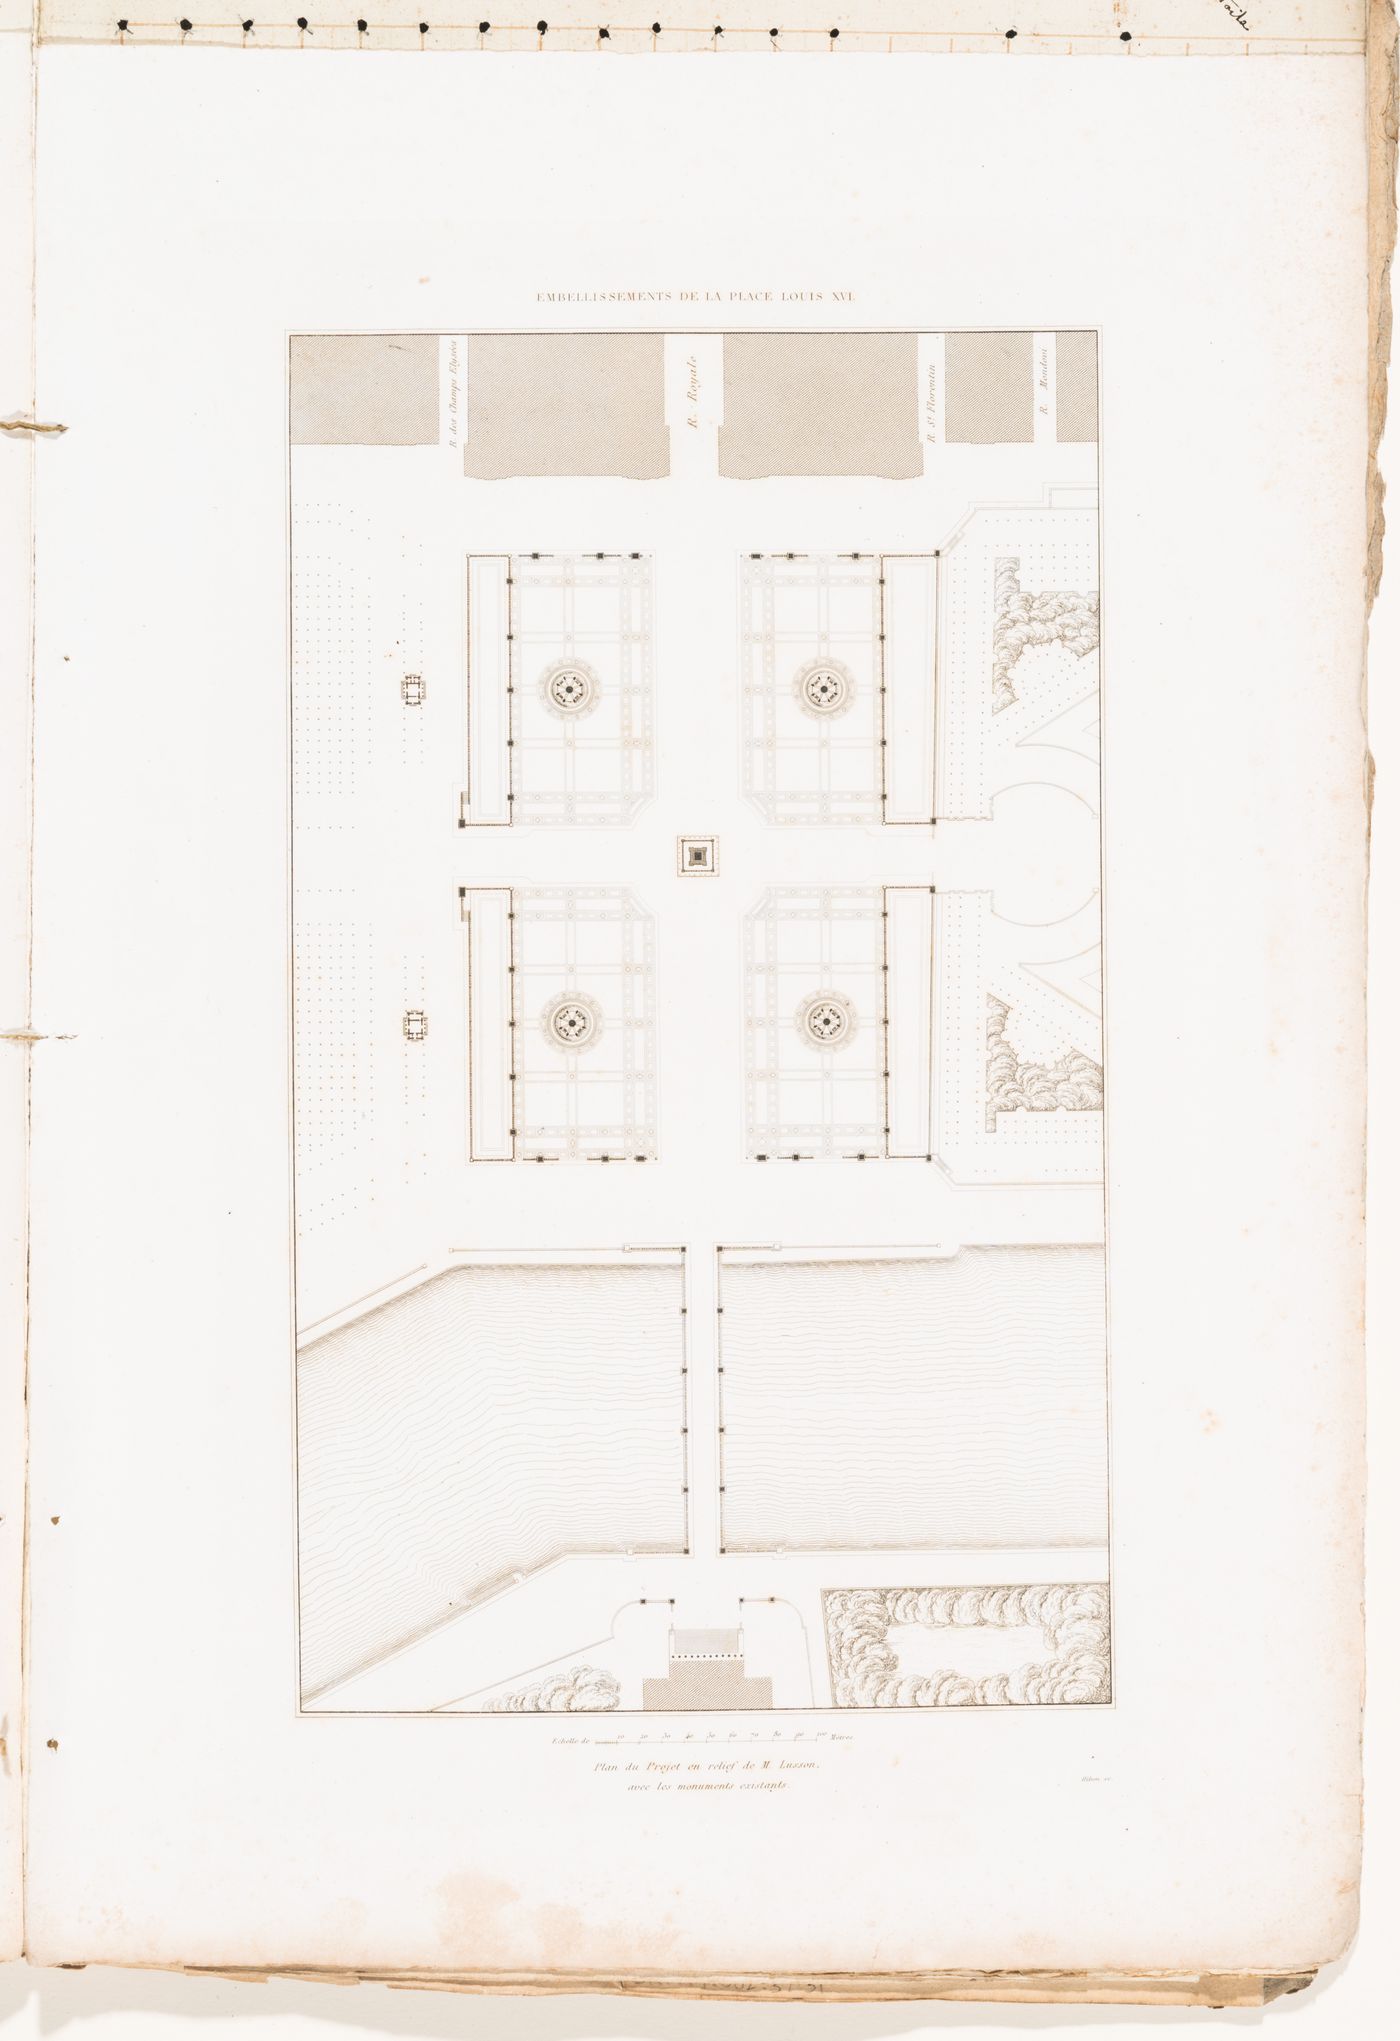 Plan for a project "en relief" by Lusson for place Louis XVI